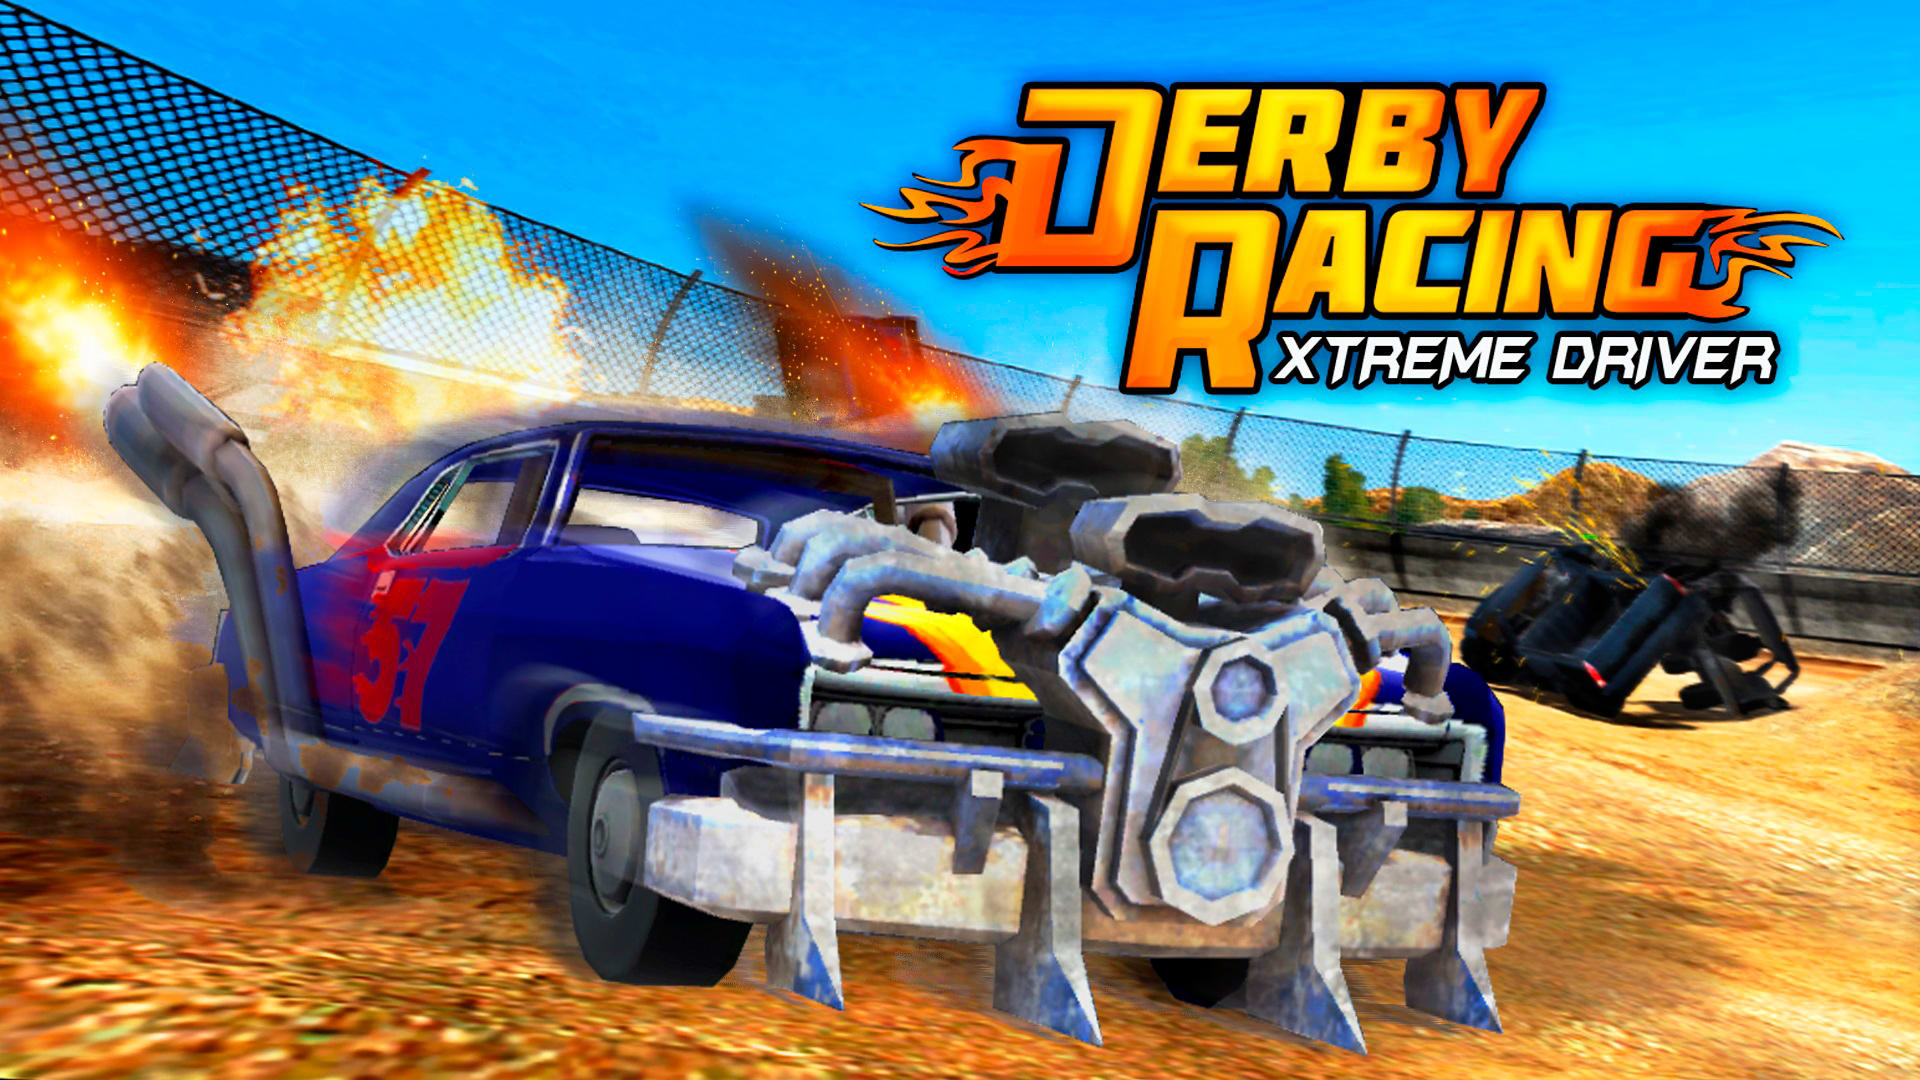 Derby Racing: Xtreme Driver